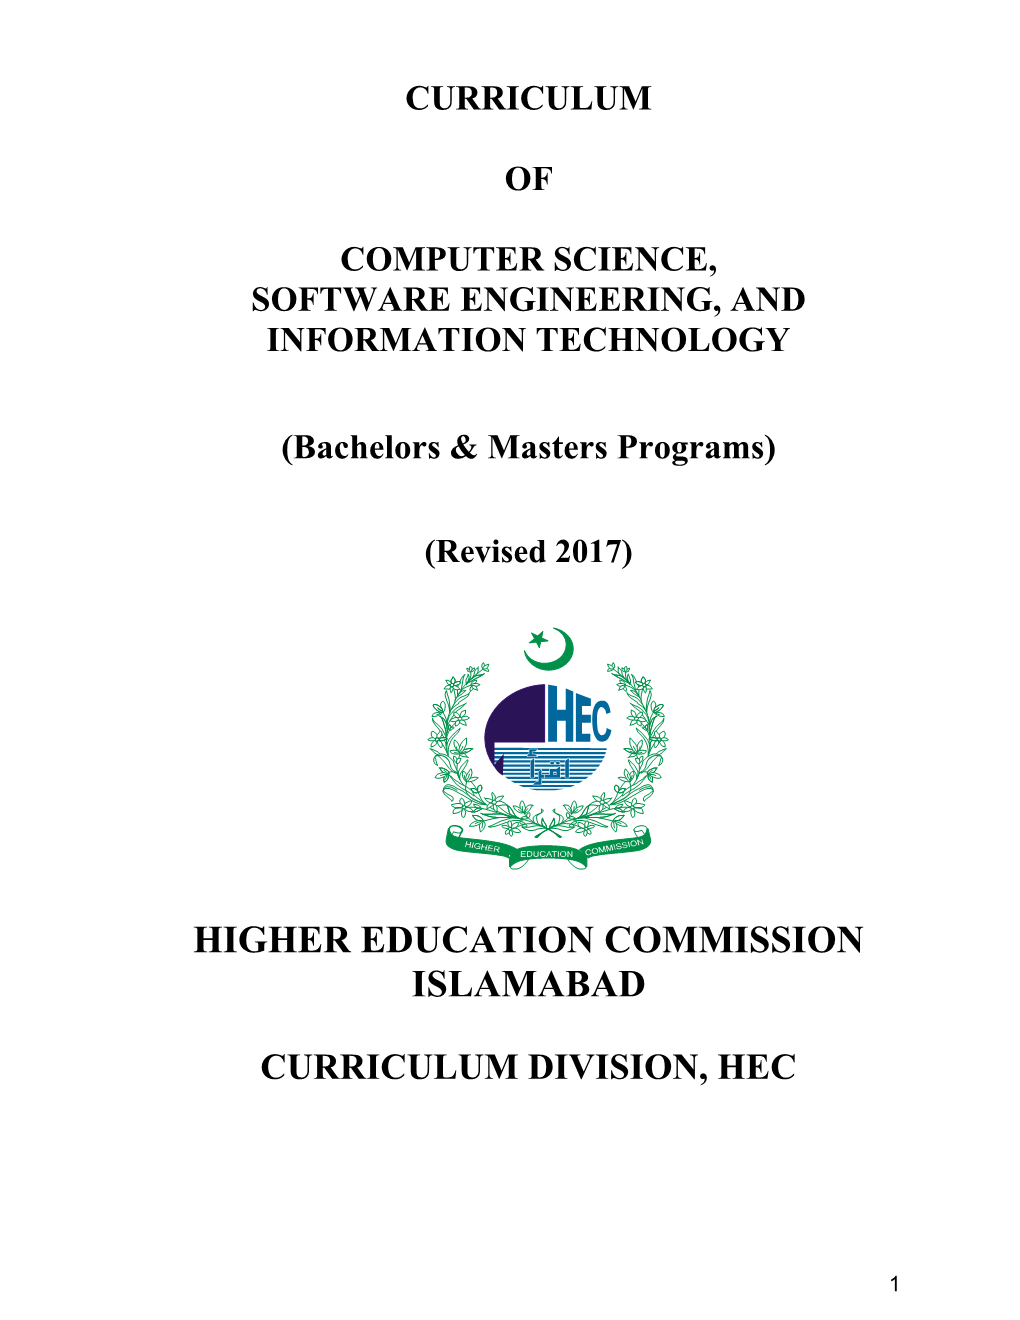 Computer Science, Software Engineering, and Information Technology